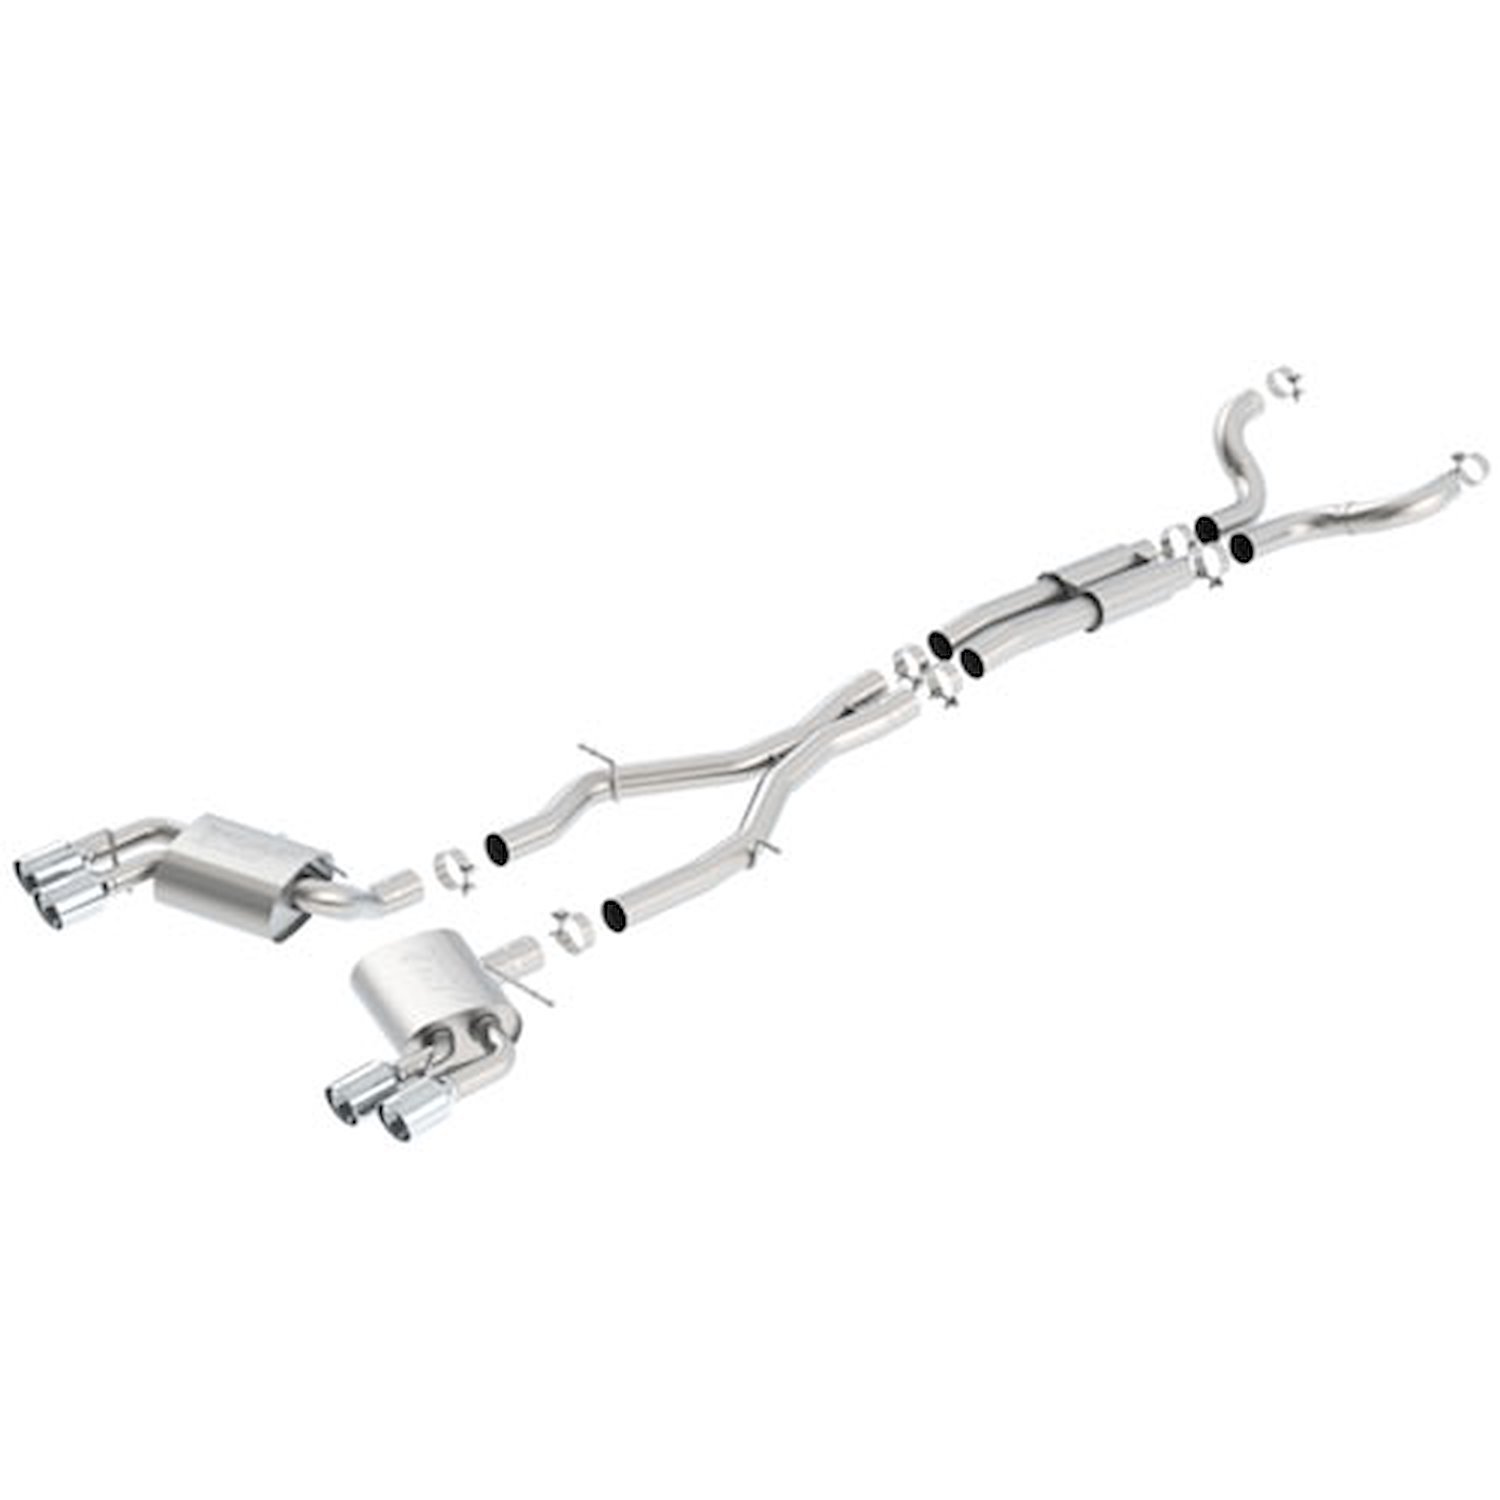 Cat-Back Exhaust System With S-type Mufflers for 2016-2018 Camaro SS 6.2L